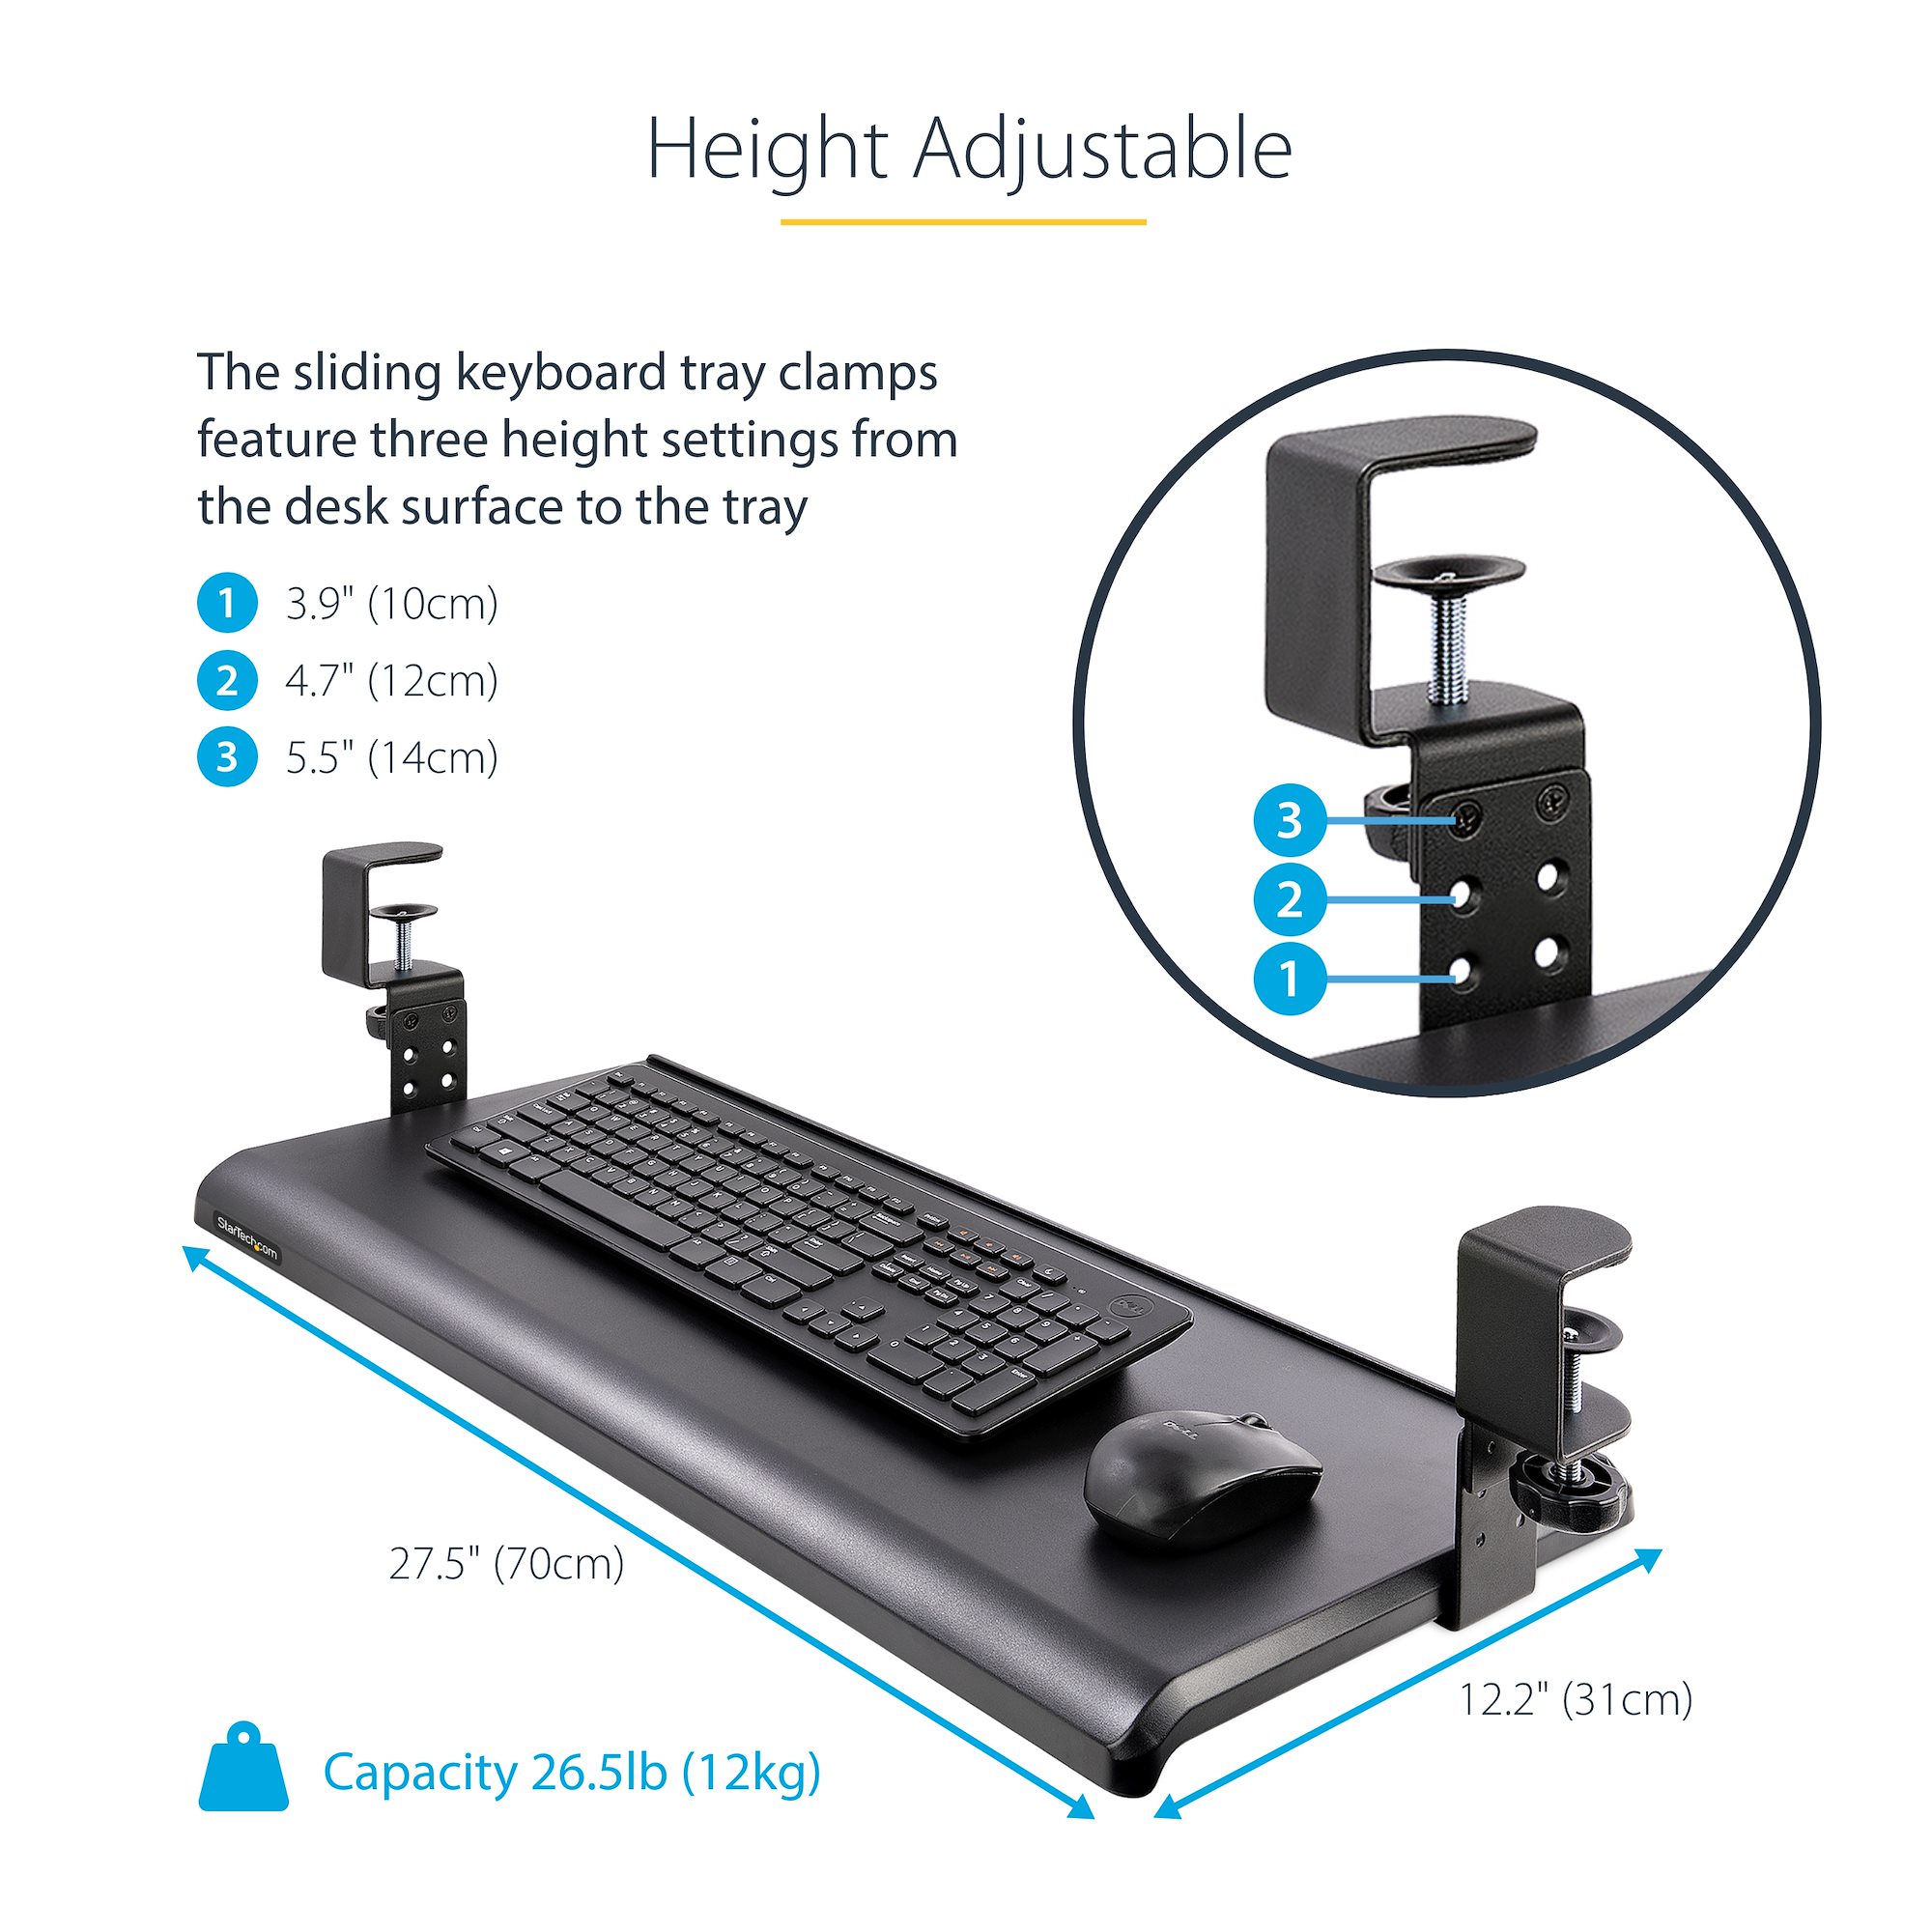 https://media.startech.com/cms/products/gallery_large/keyboard-tray-clamp1.m.jpg